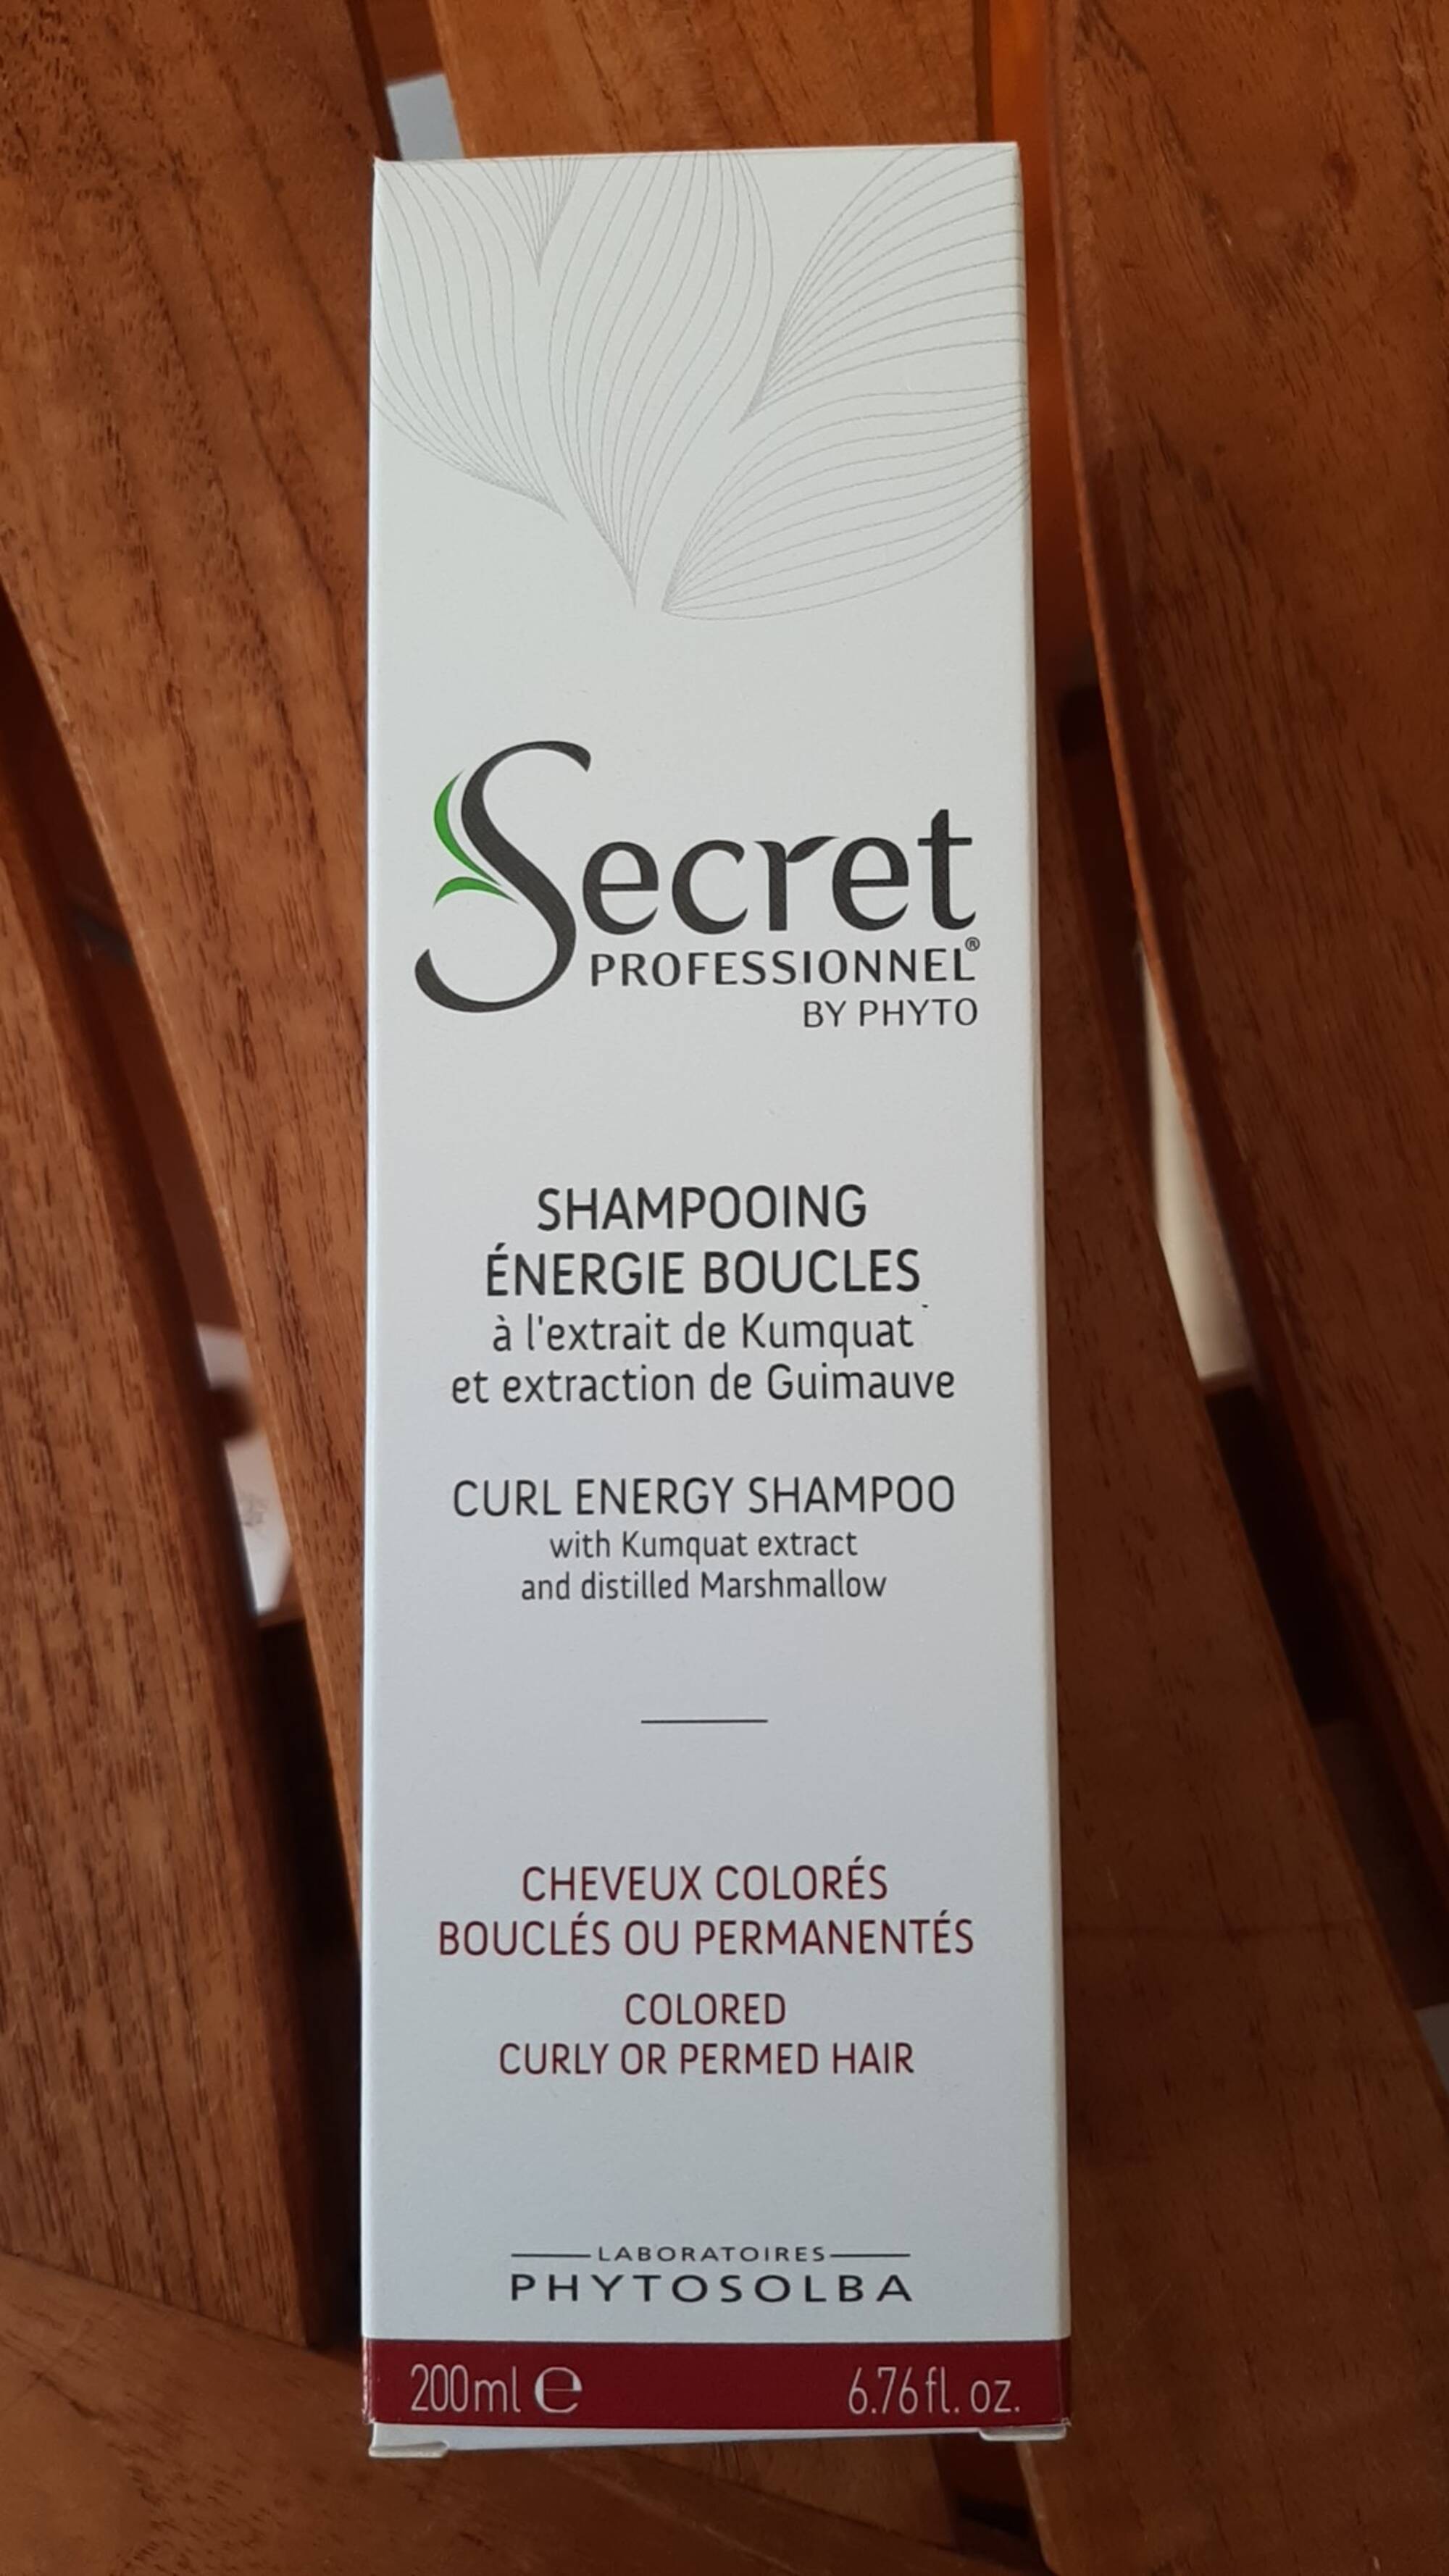 SECRET PROFESSIONNEL BY PHYTO - Shampooing énergie boucles